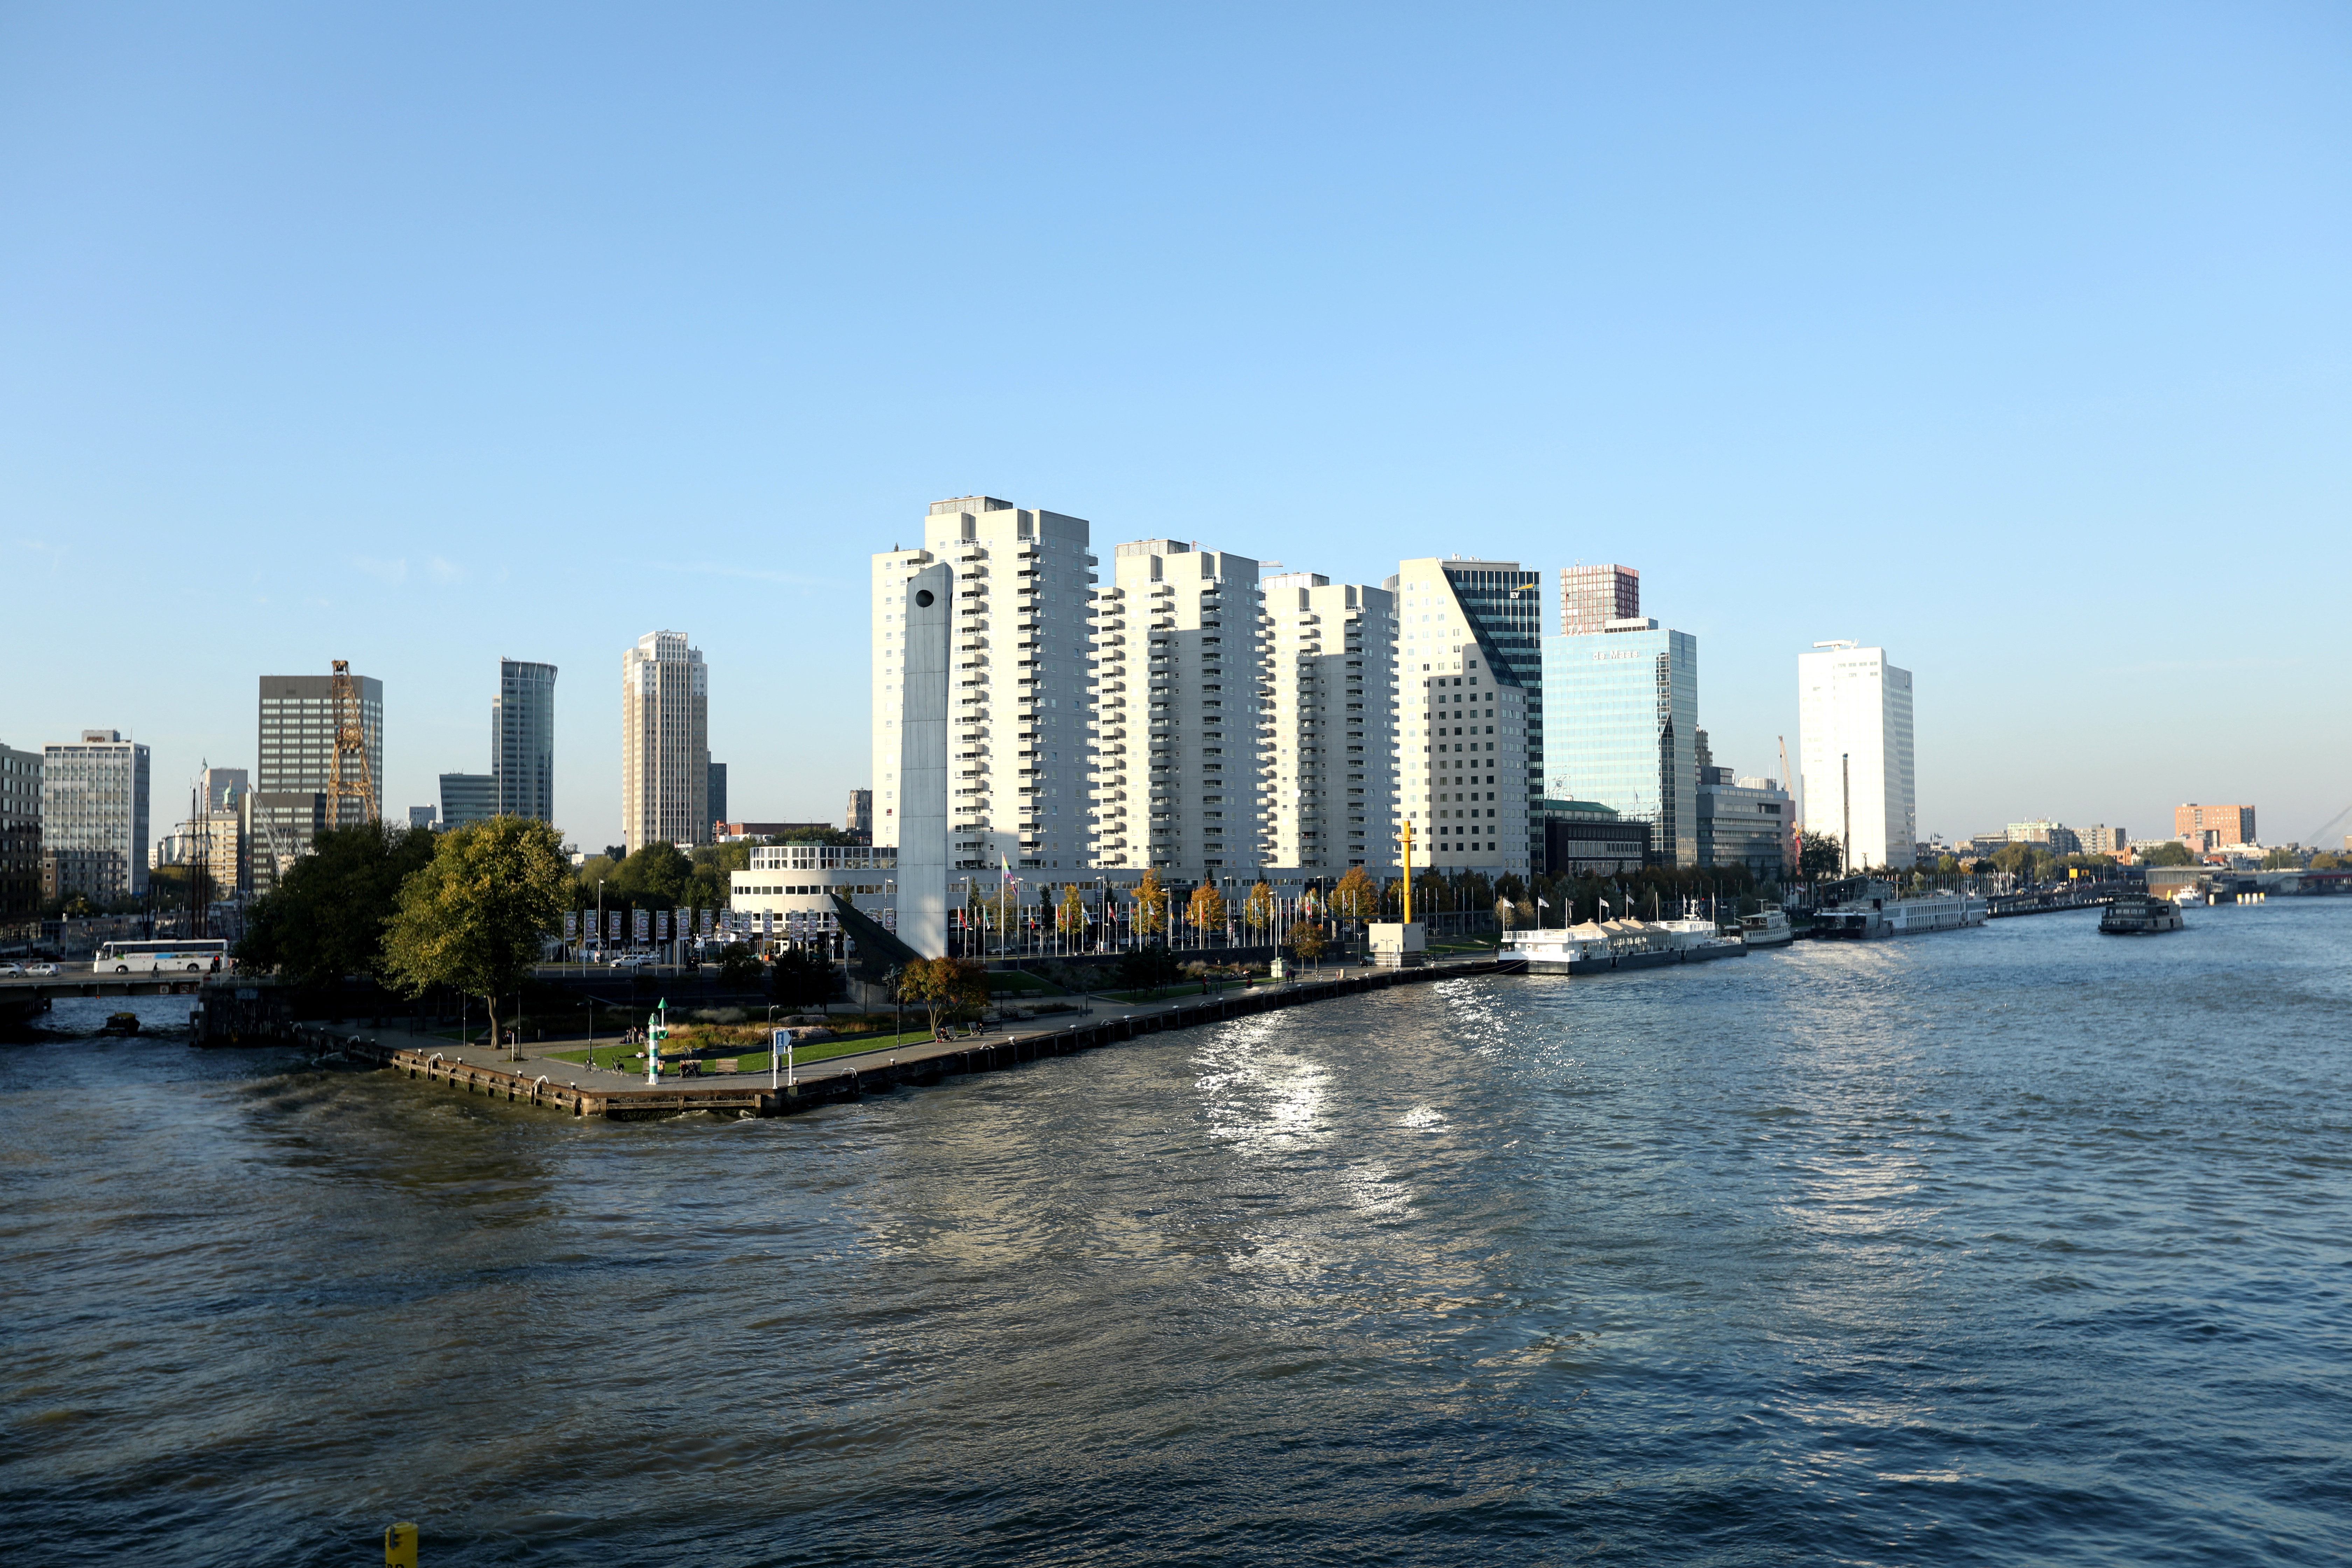 Cityscape is seen in Rotterdam